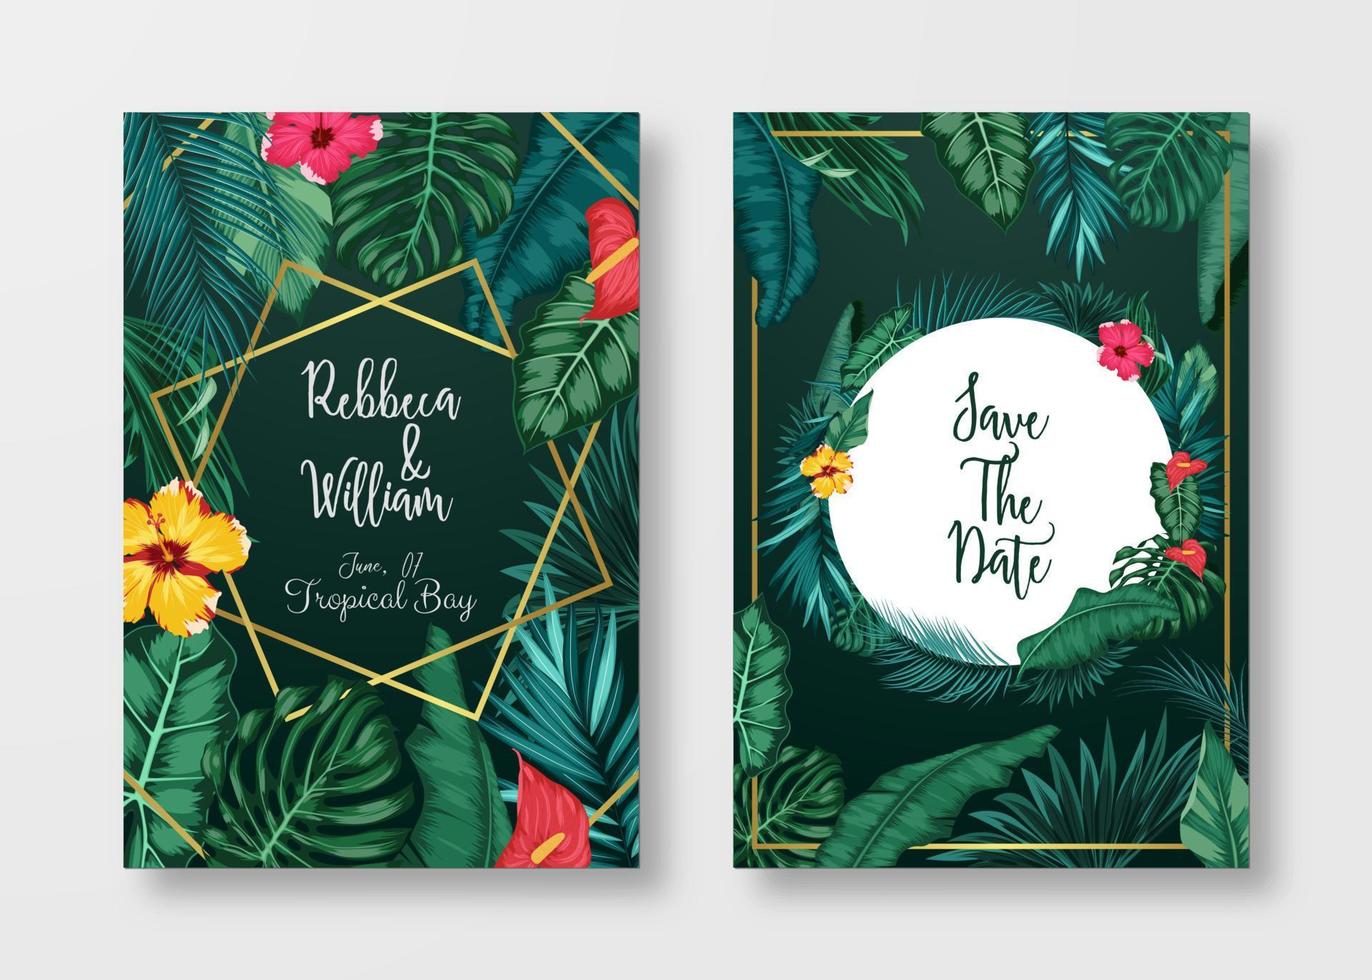 Floral card set Wedding Invitation, save the date, and frame vector